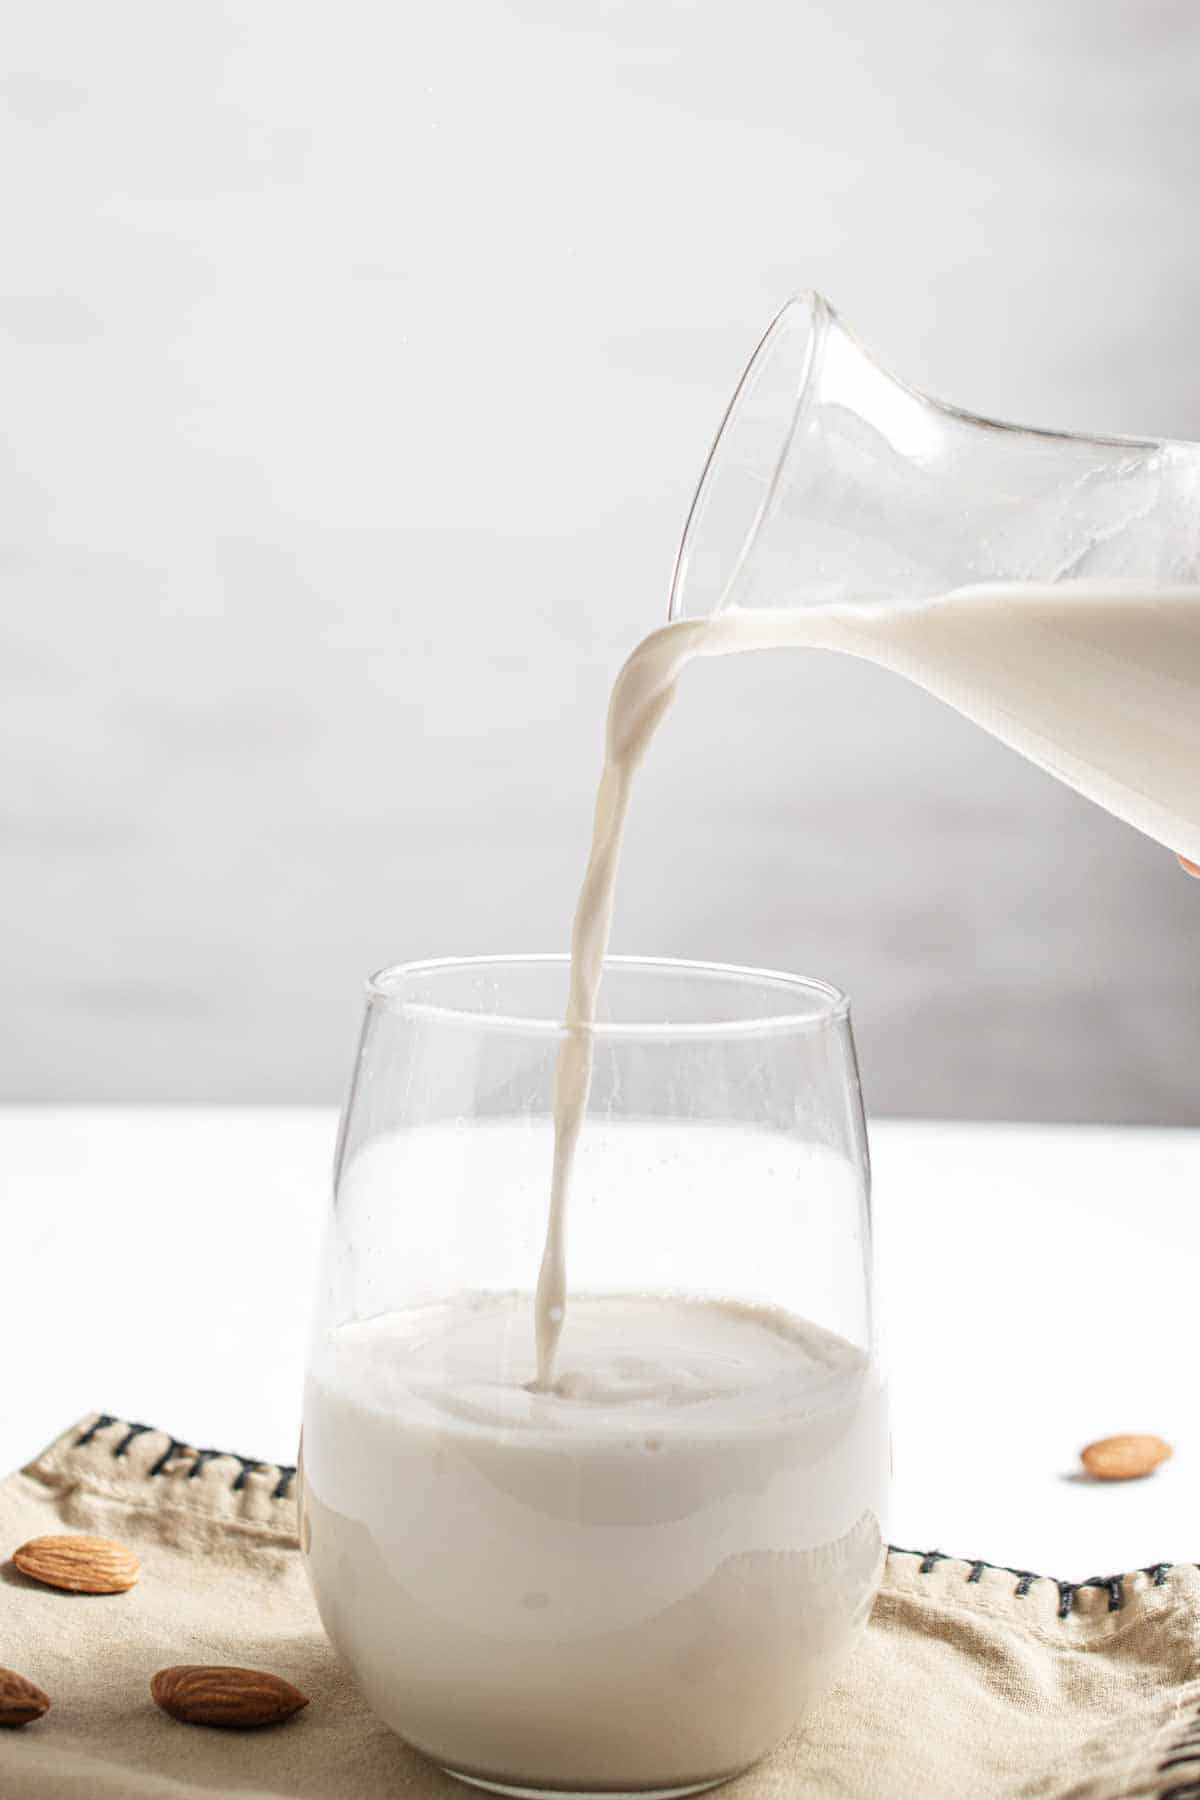 Pouring homemade almond milk into a glass.